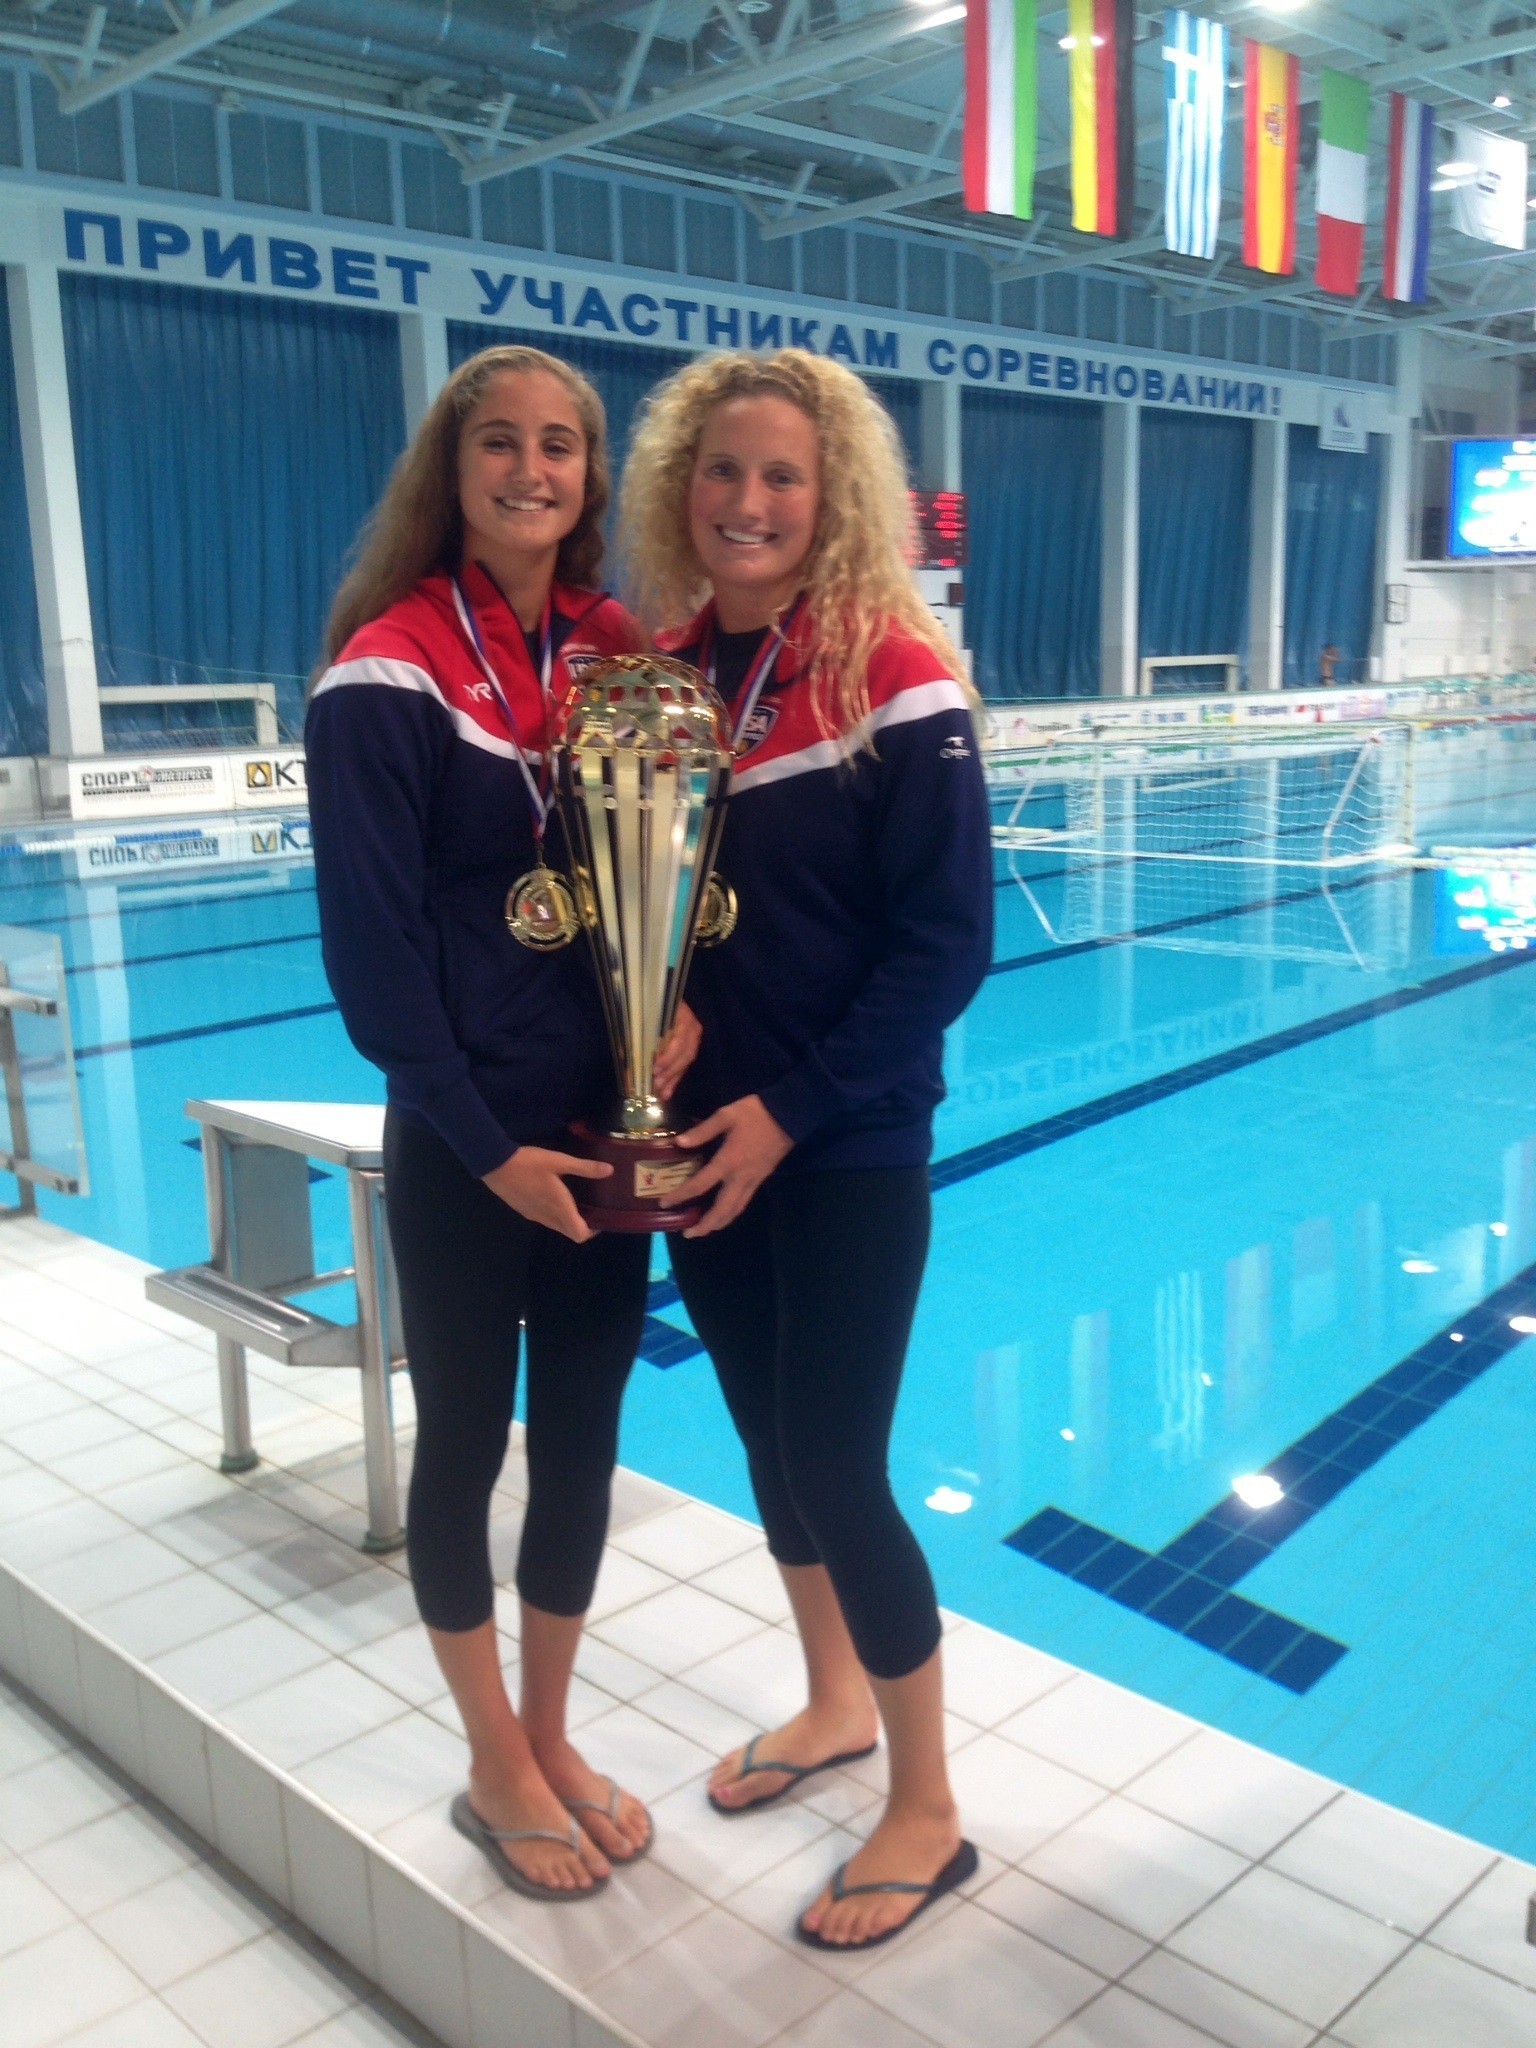 Gilchrist, Musselman win Kirishi Cup with US women's water polo team - Daily Pilot